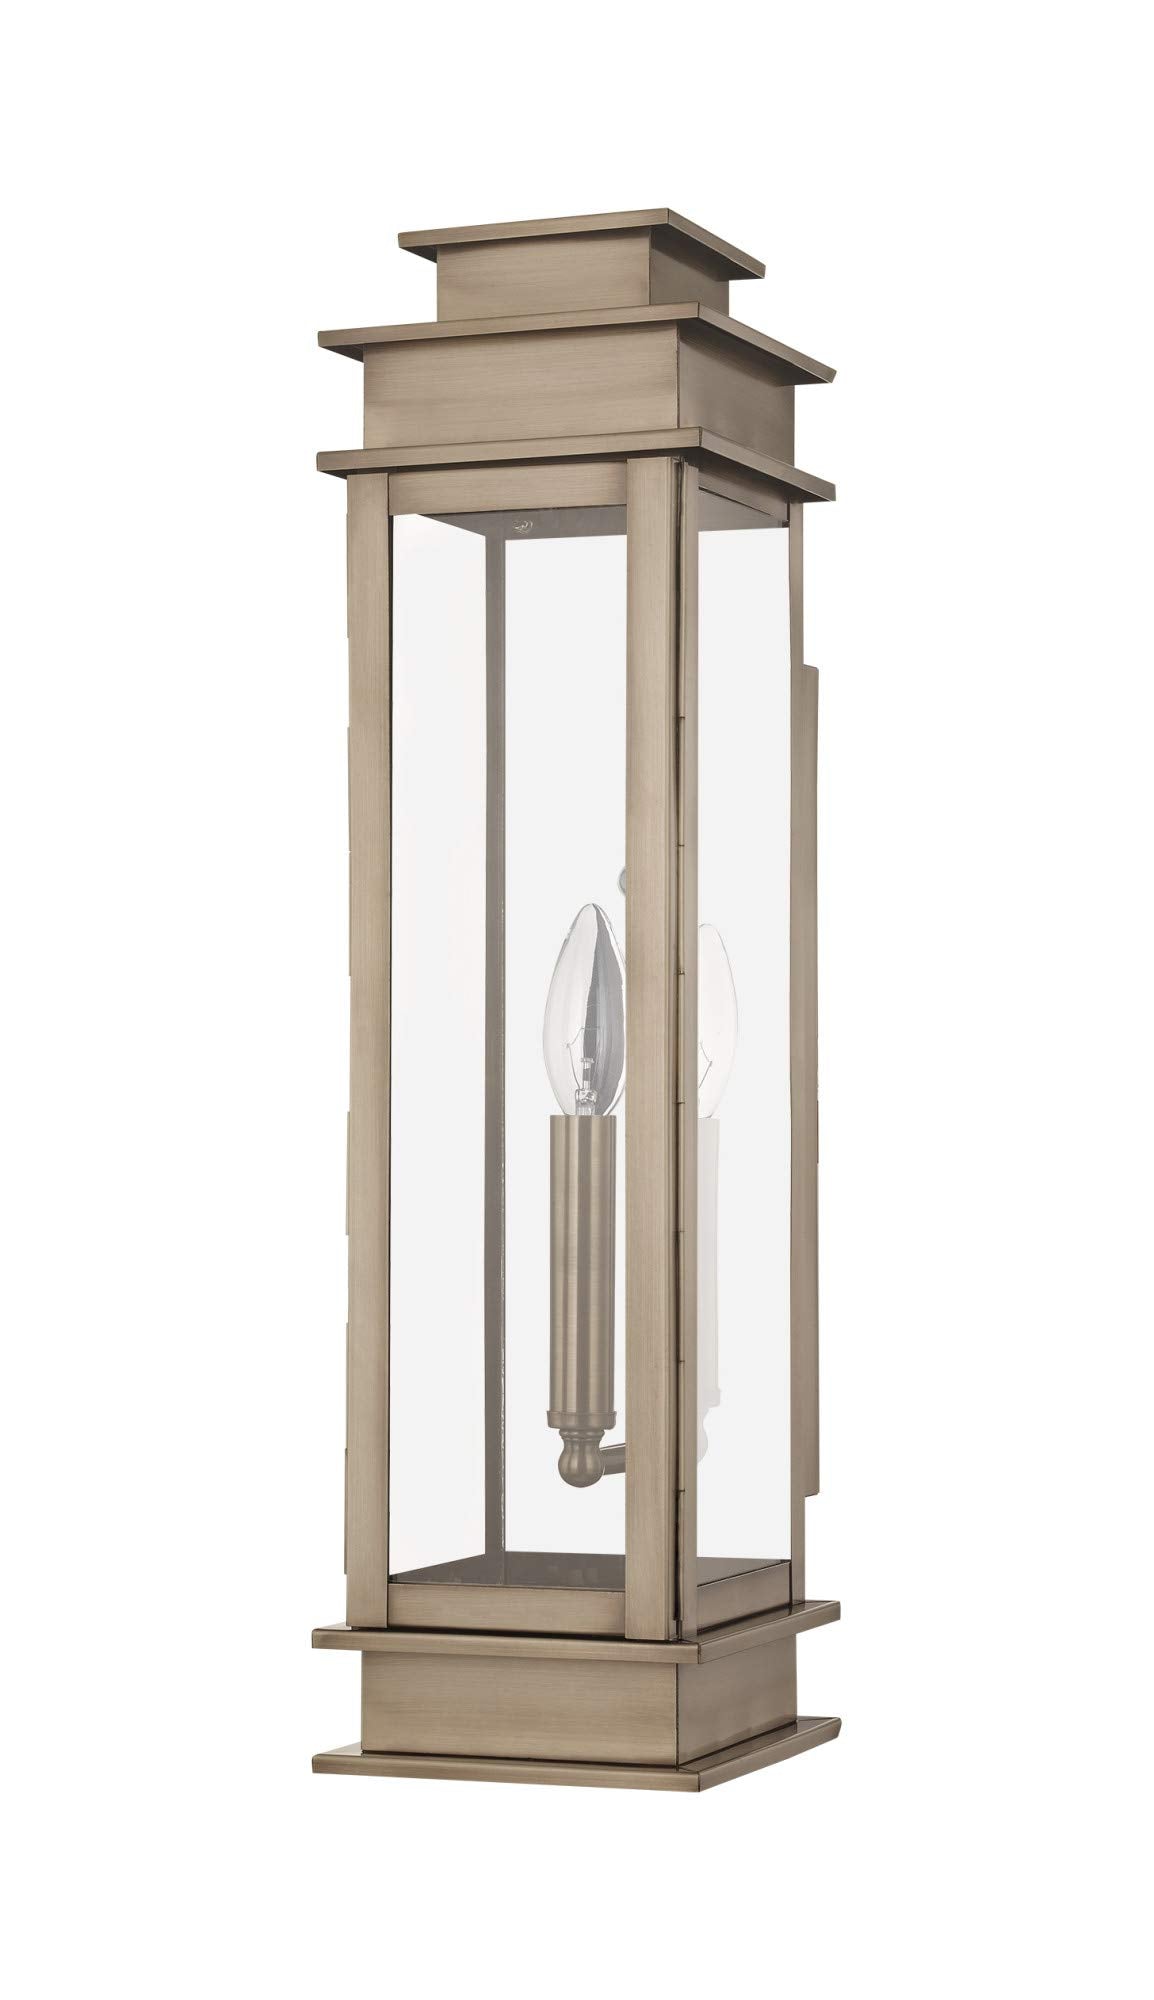 Livex Lighting 20207-04 Transitional One Light Outdoor Wall Lantern from Princeton Collection in Black Finish